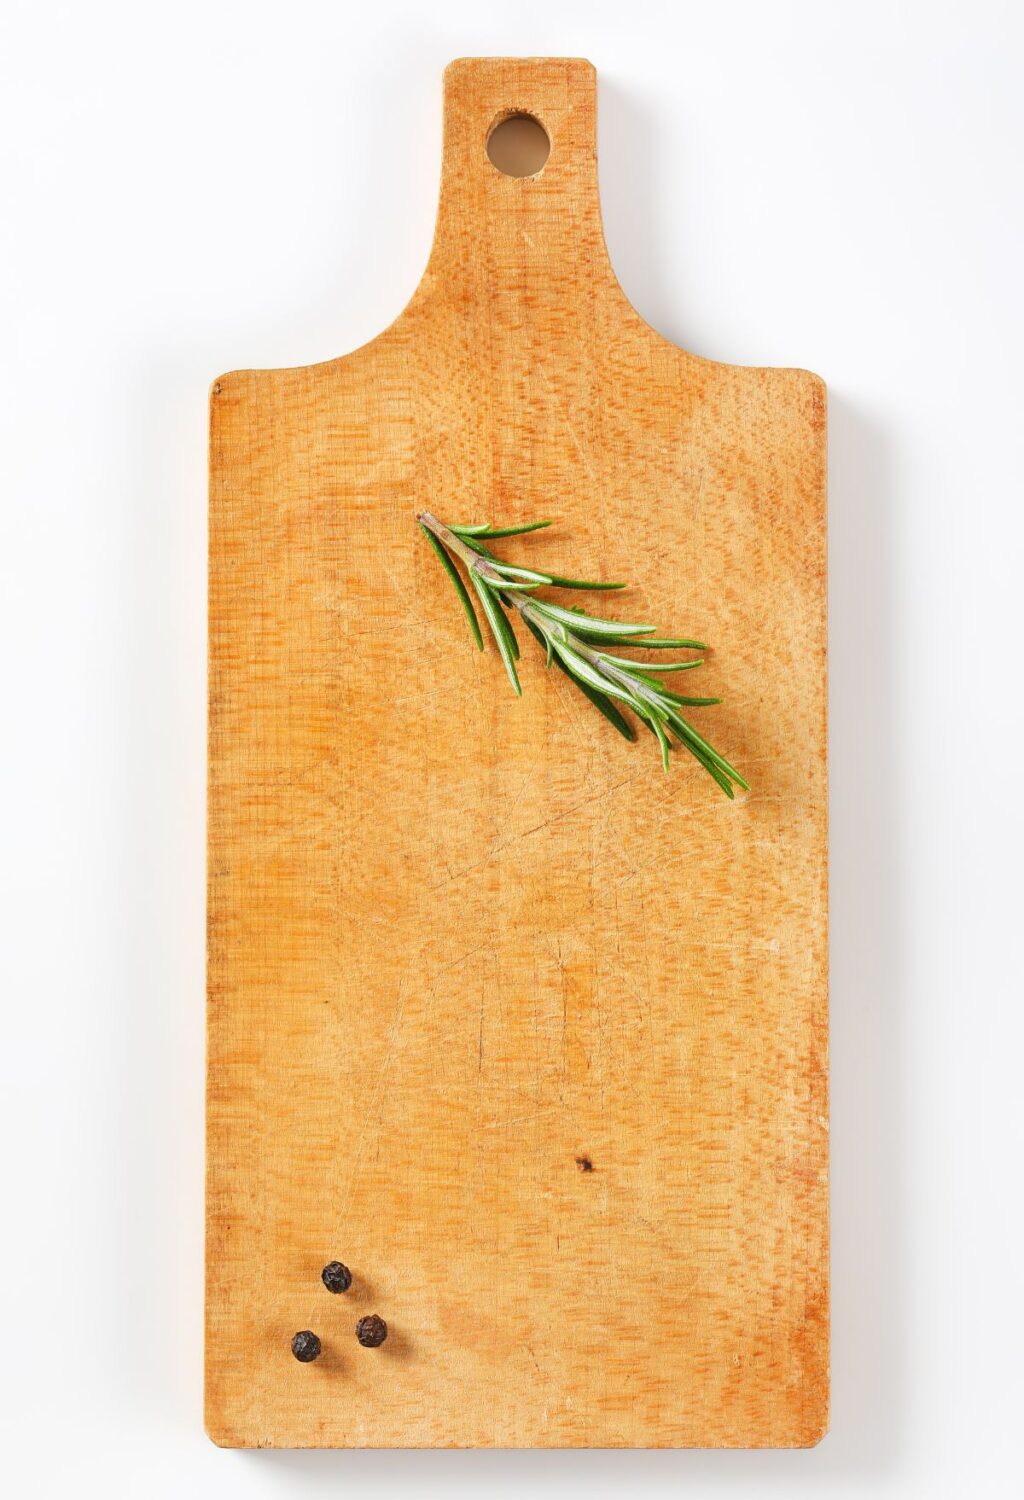 A wooden cutting board with a rosemary sprig on it.